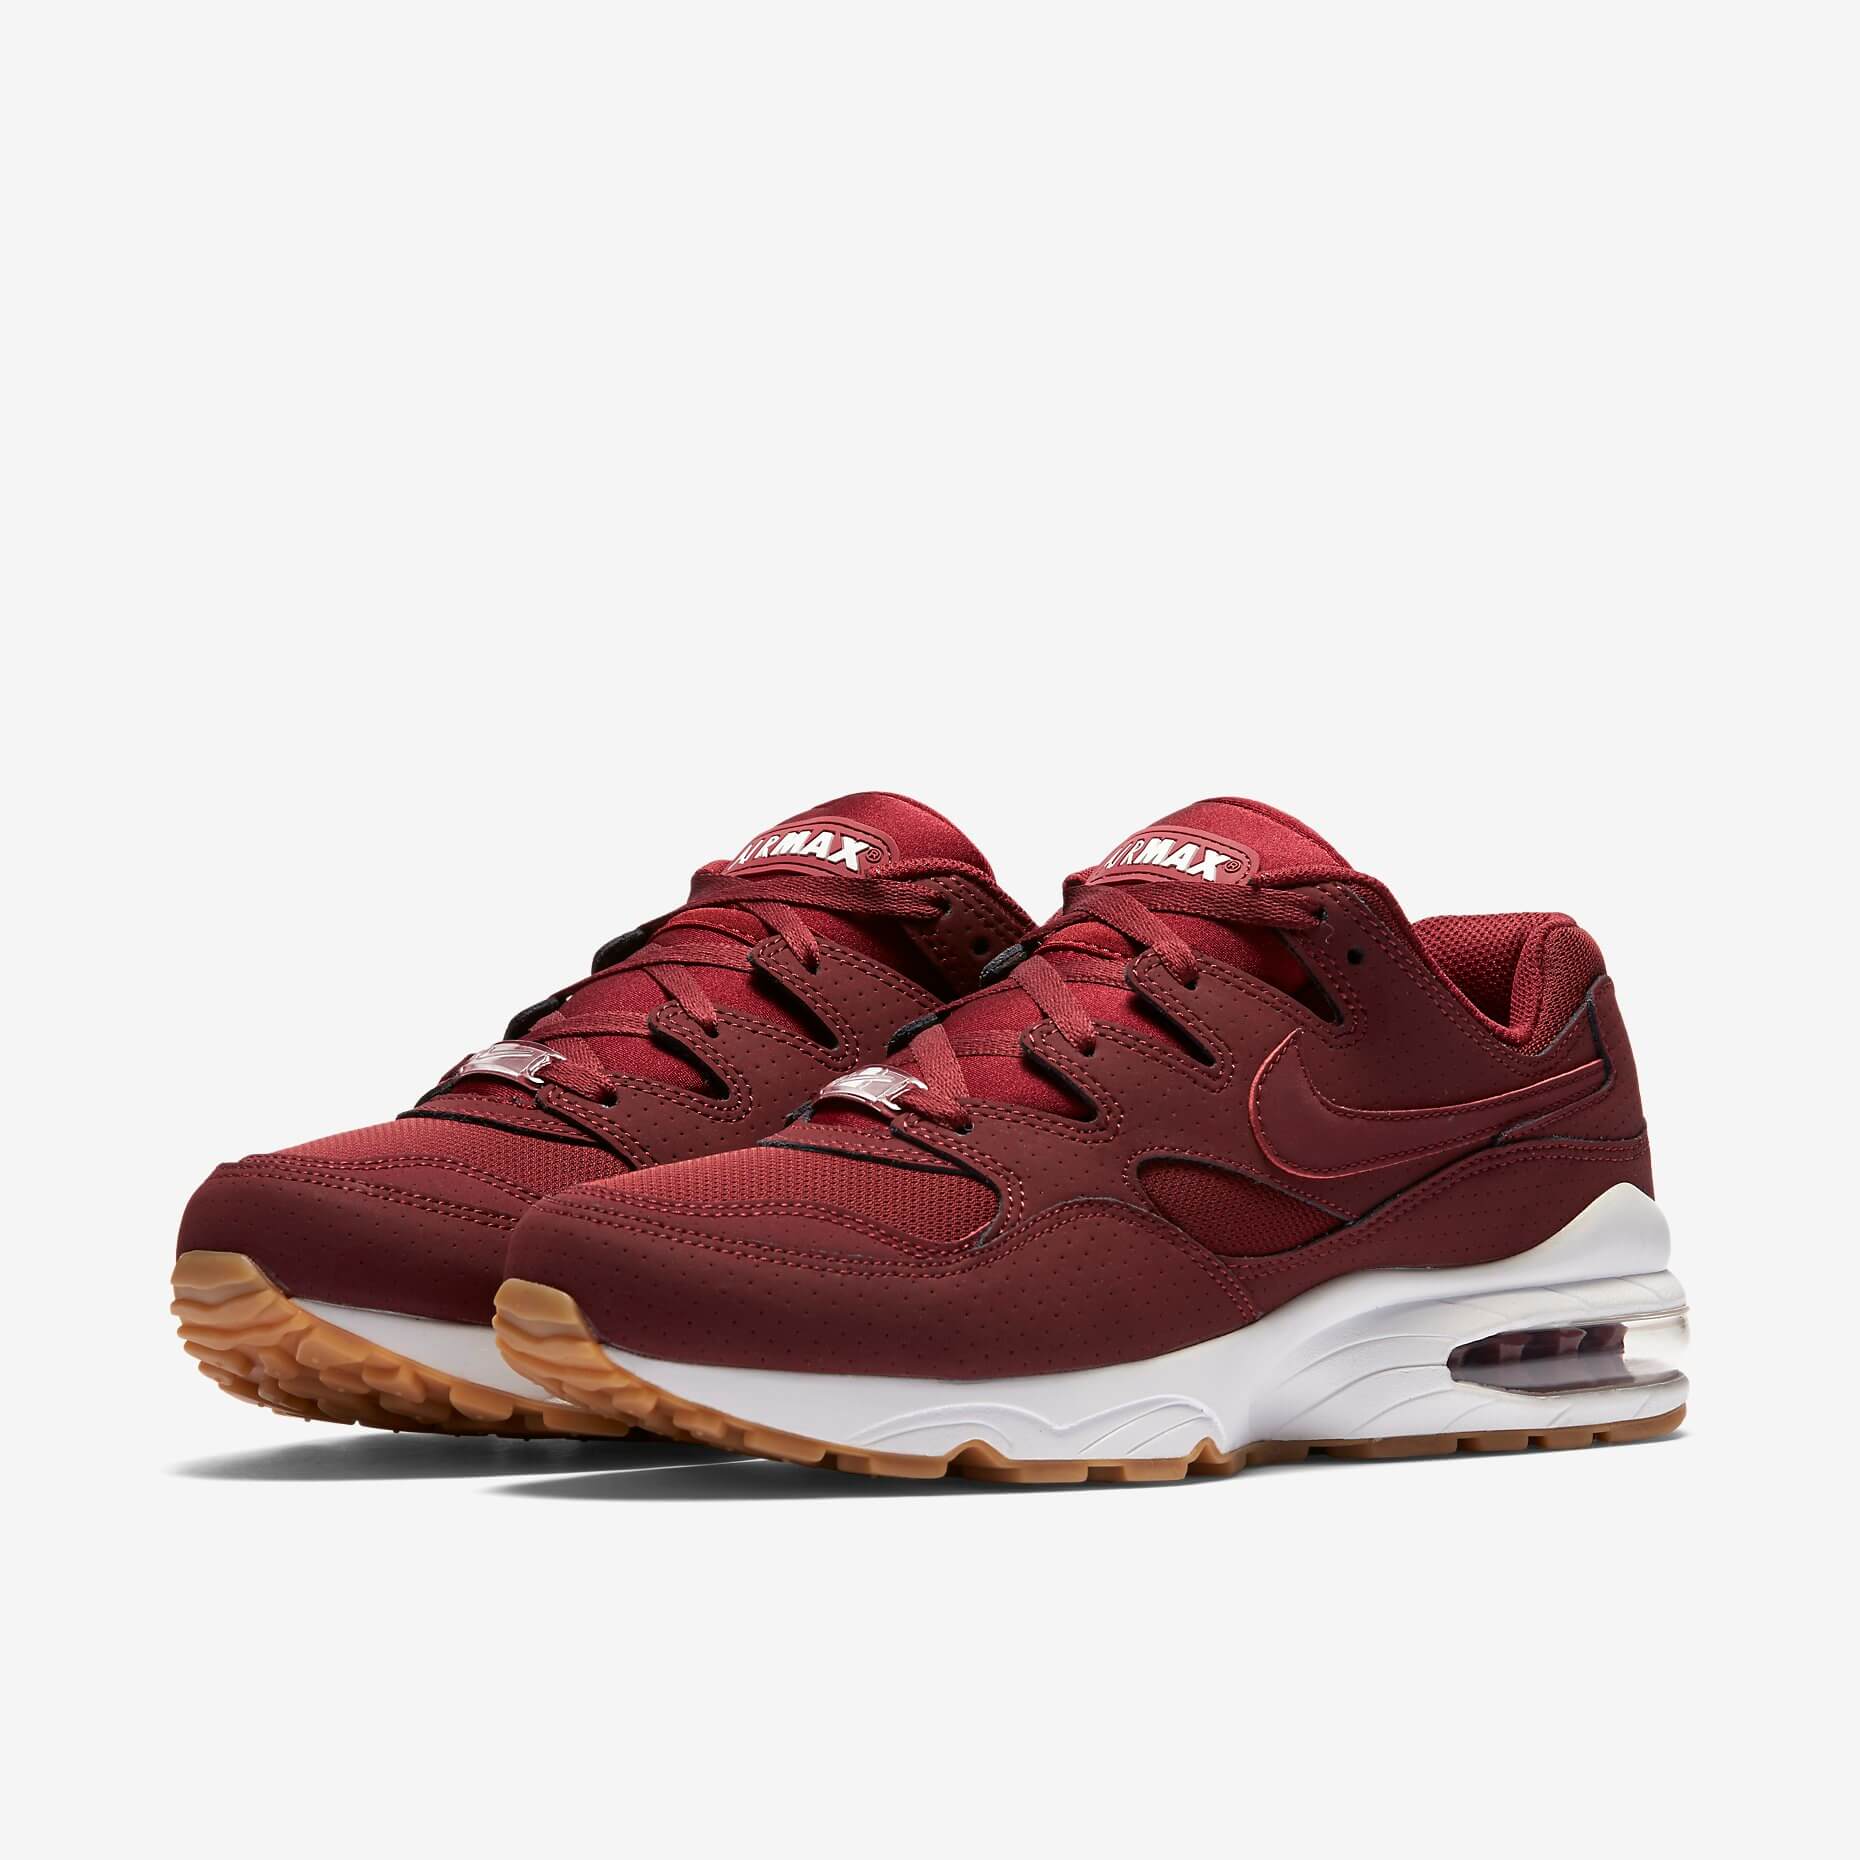 Nike Air Max 94 Premium Team Red - Where To Buy - 806238-669 | The 